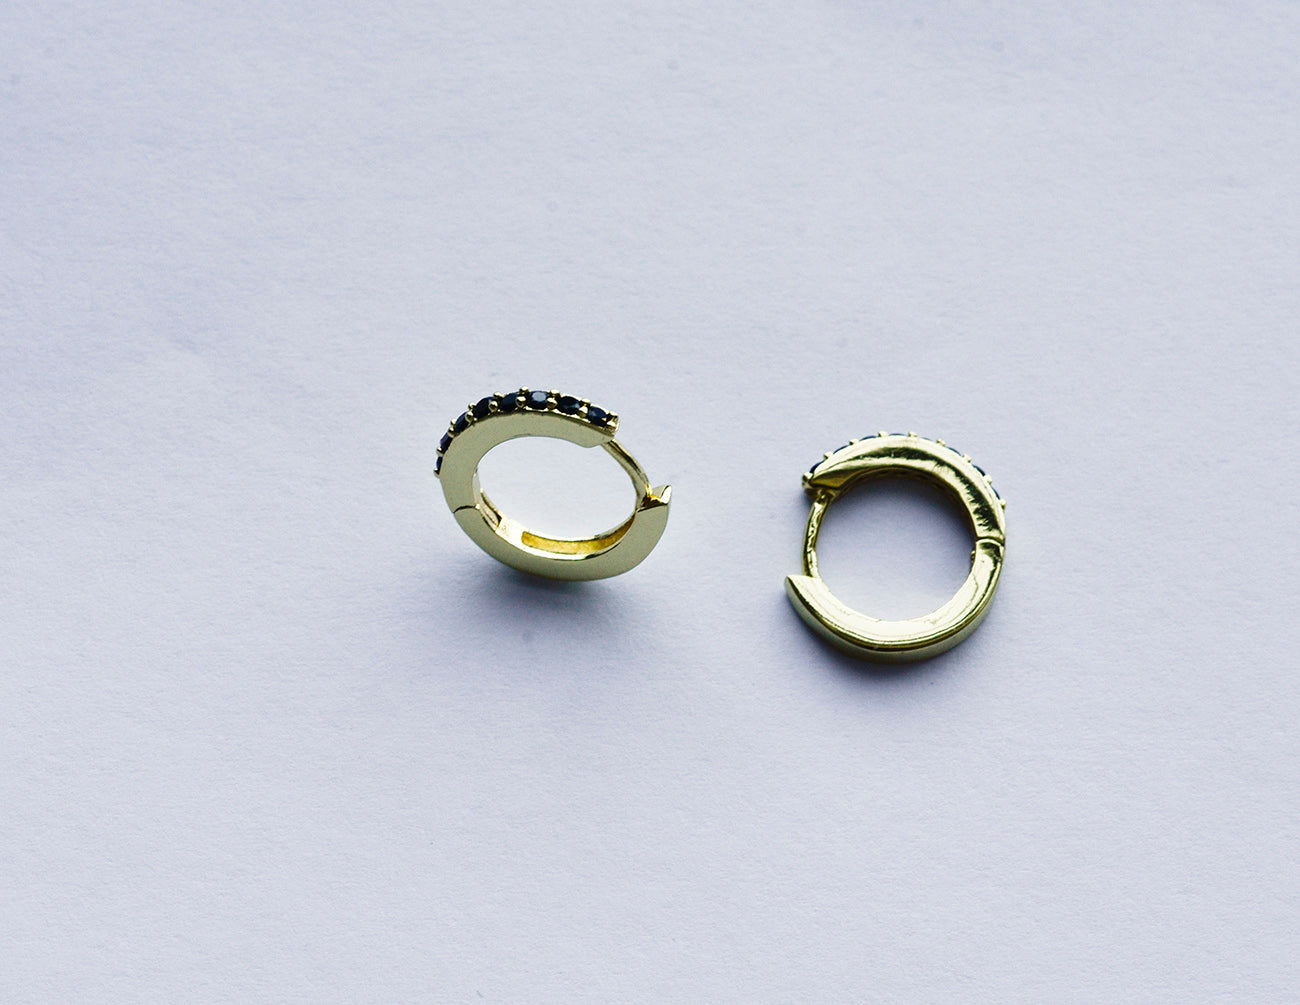 Load image into Gallery viewer, Product picture of Veritume earring in gold with black stones named Cajsa.  